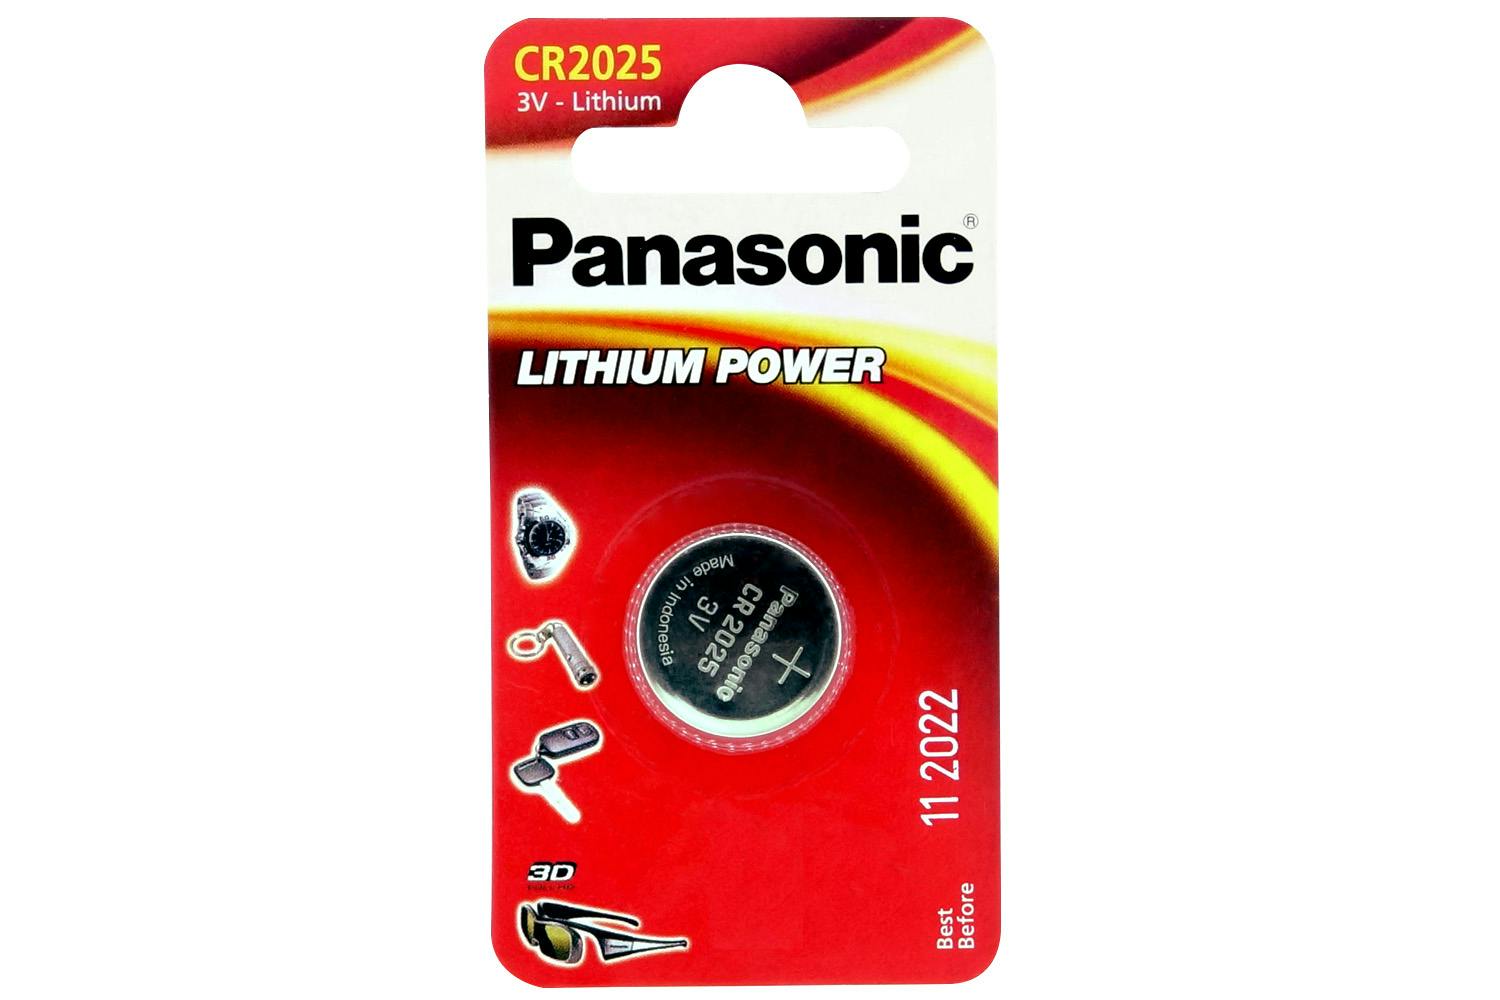 Panasonic Lithium Coin Cell Battery | CR2025